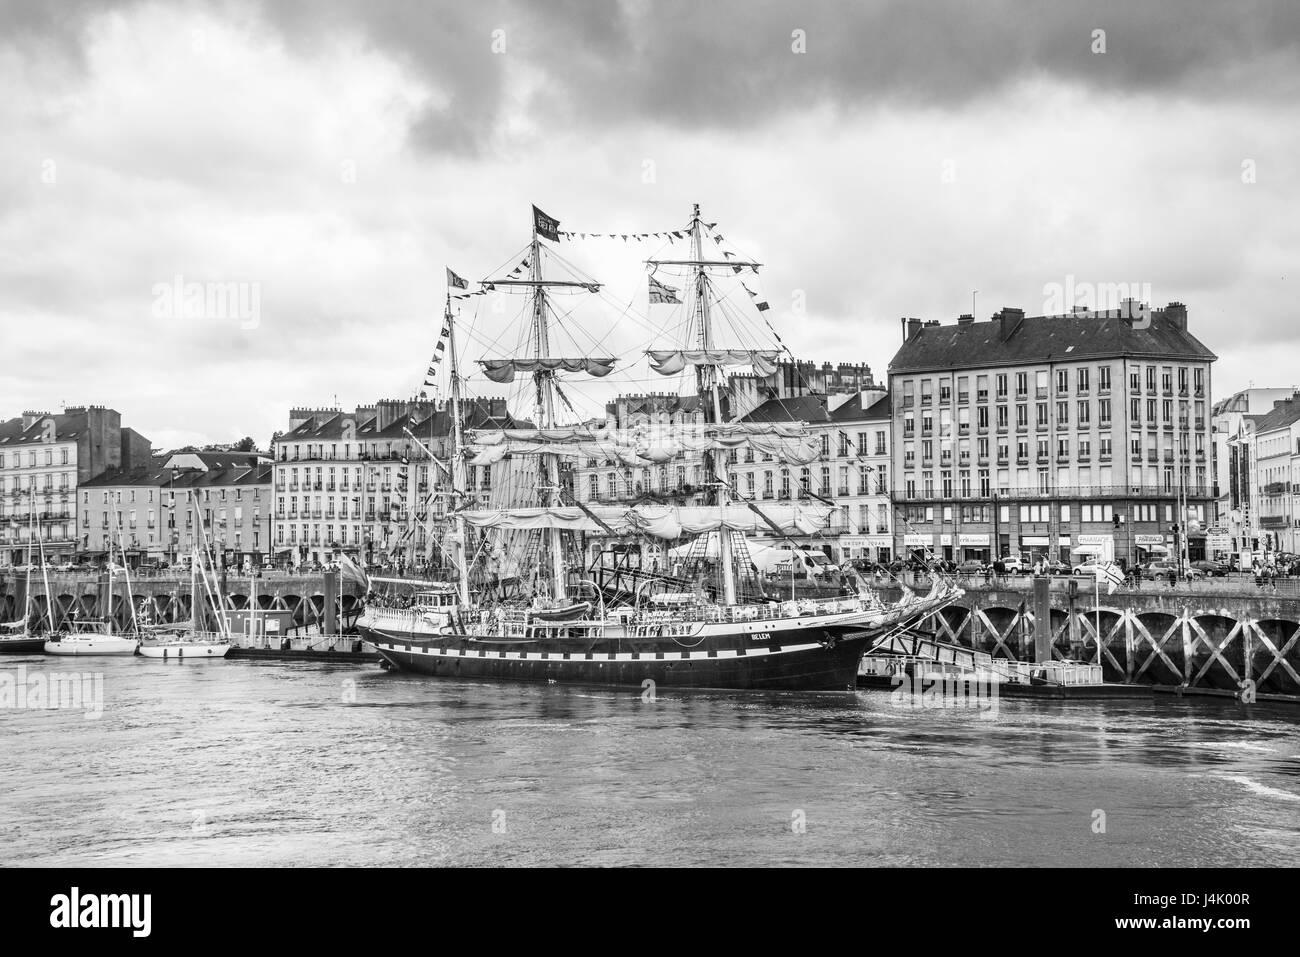 France, Pays de la Loire; Nantes, three-masted barque 'Belem' moored  at Quai de la Fosse, the Belem is the oldest French sailing ship manufactured in Stock Photo